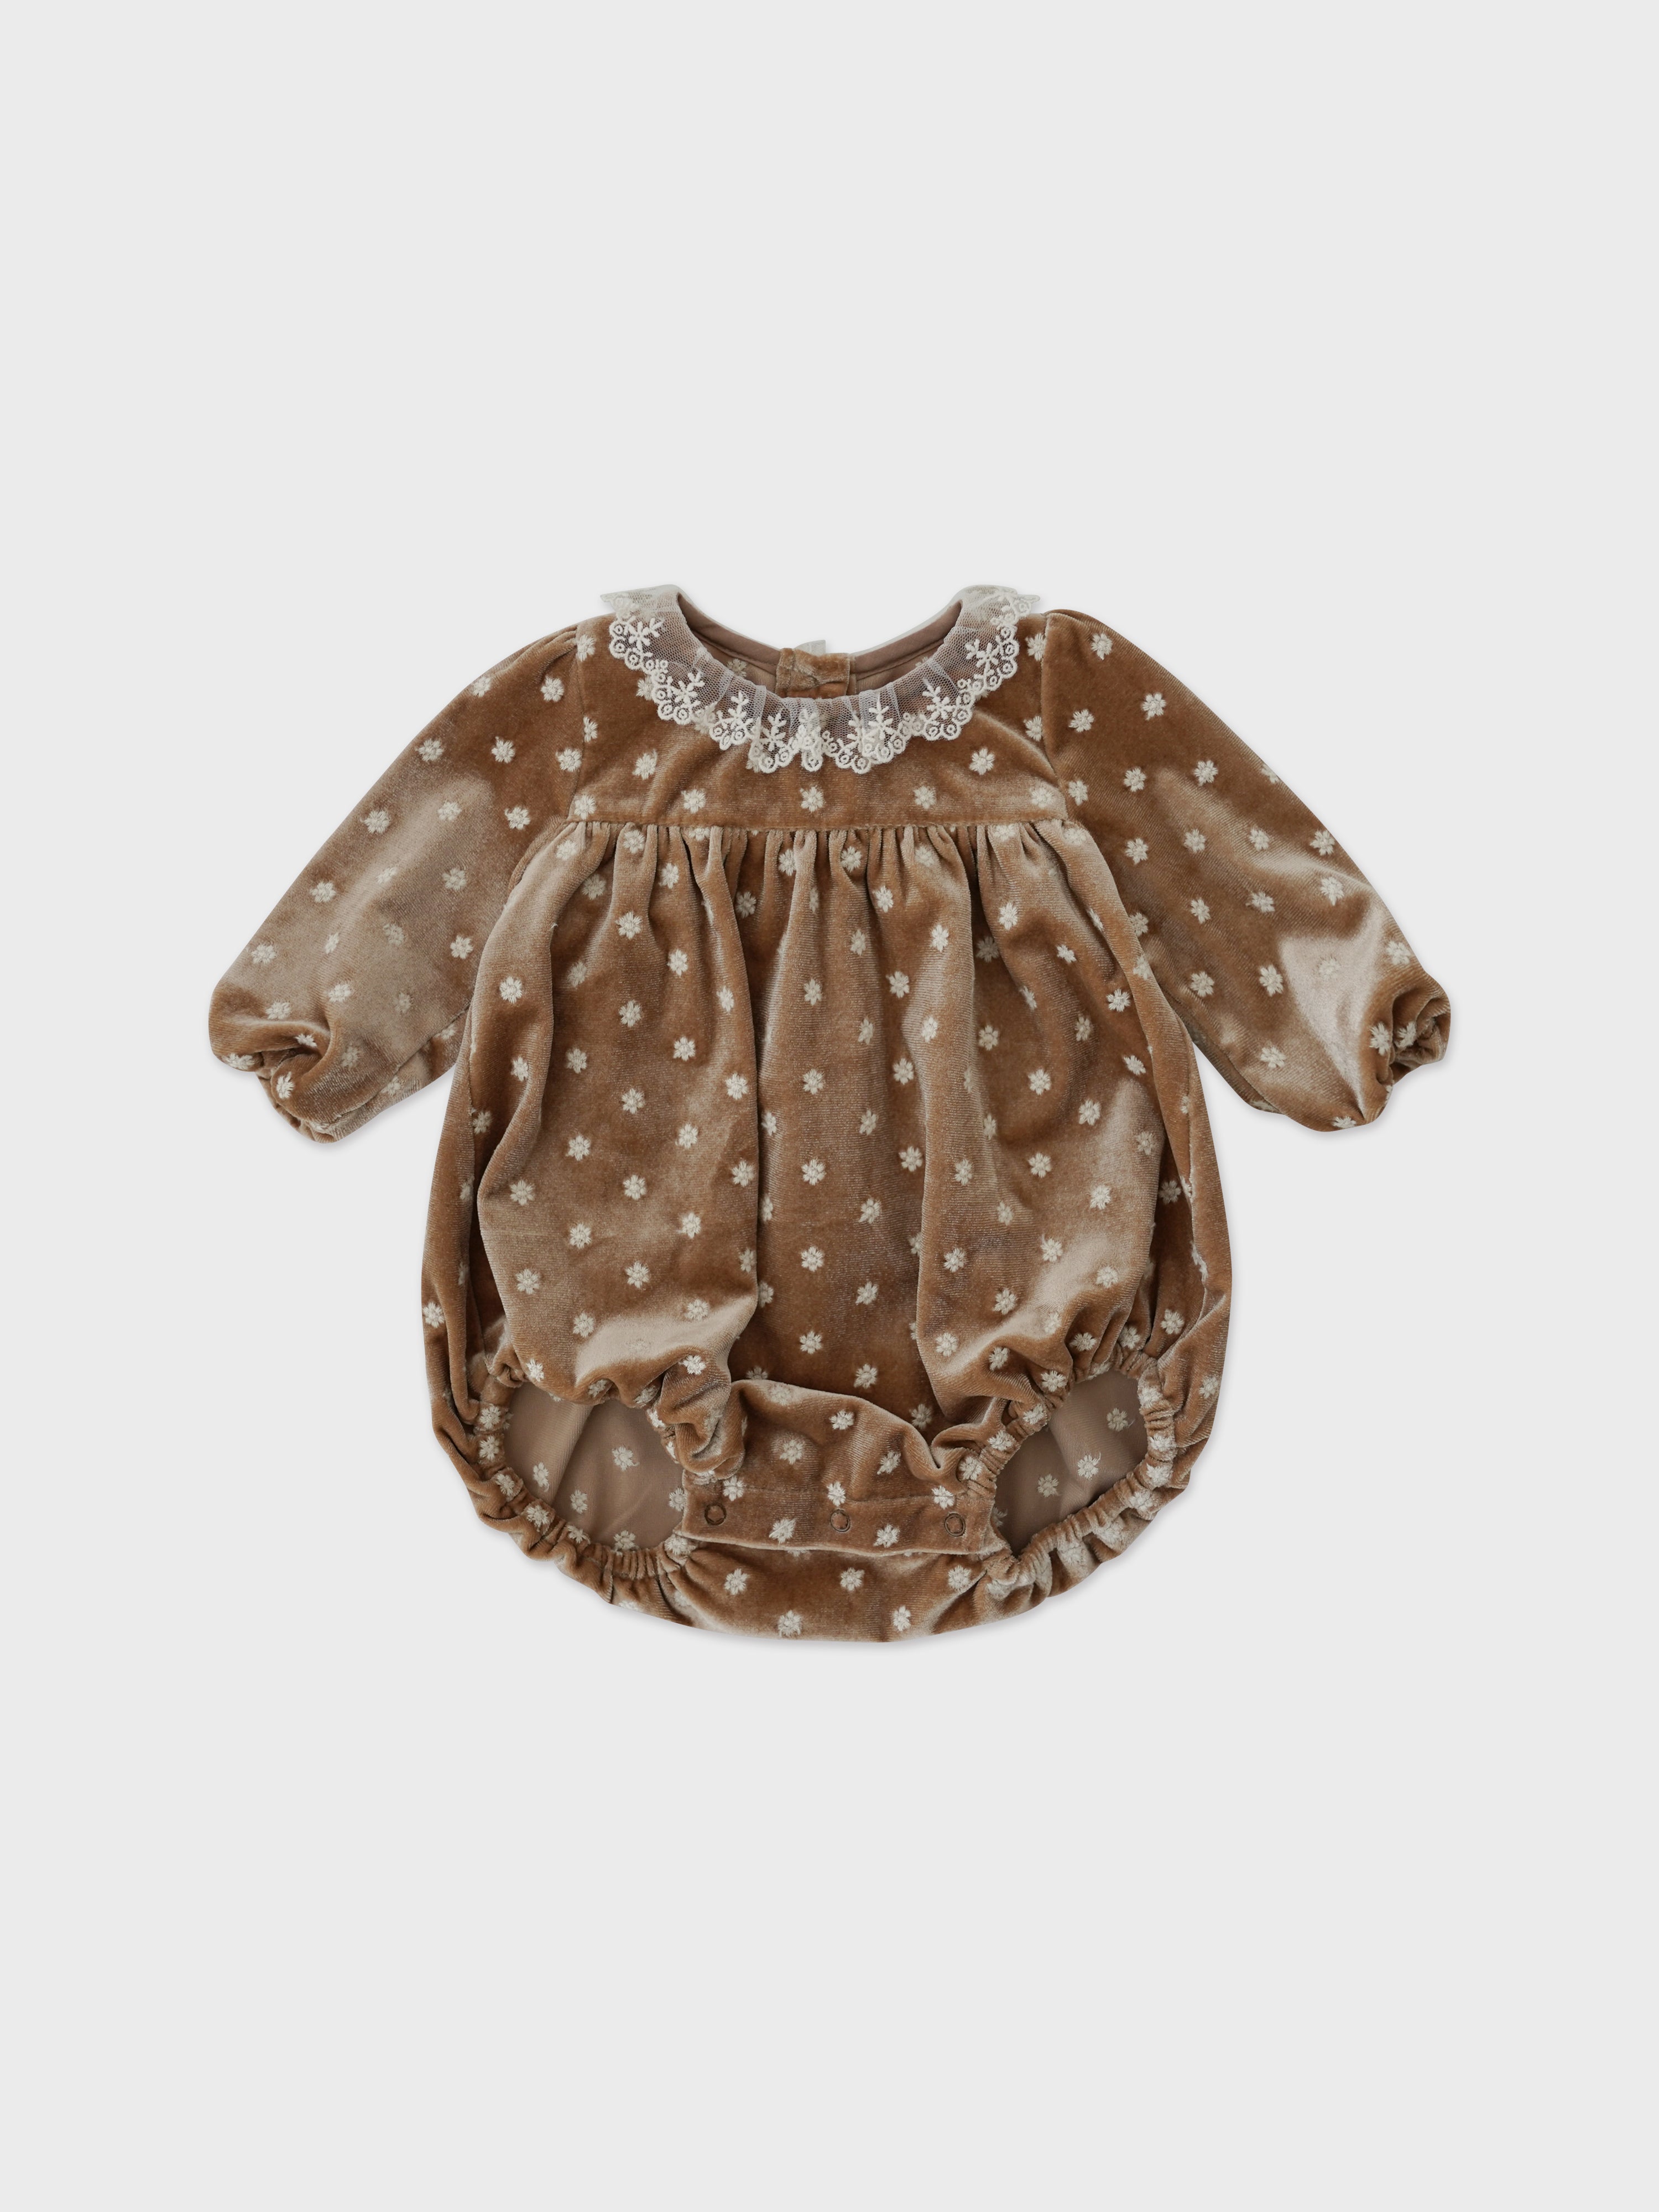 Shop Louis Vuitton Baby Girl Dresses & Rompers (GI018F, GI018D) by  LESSISMORE☆